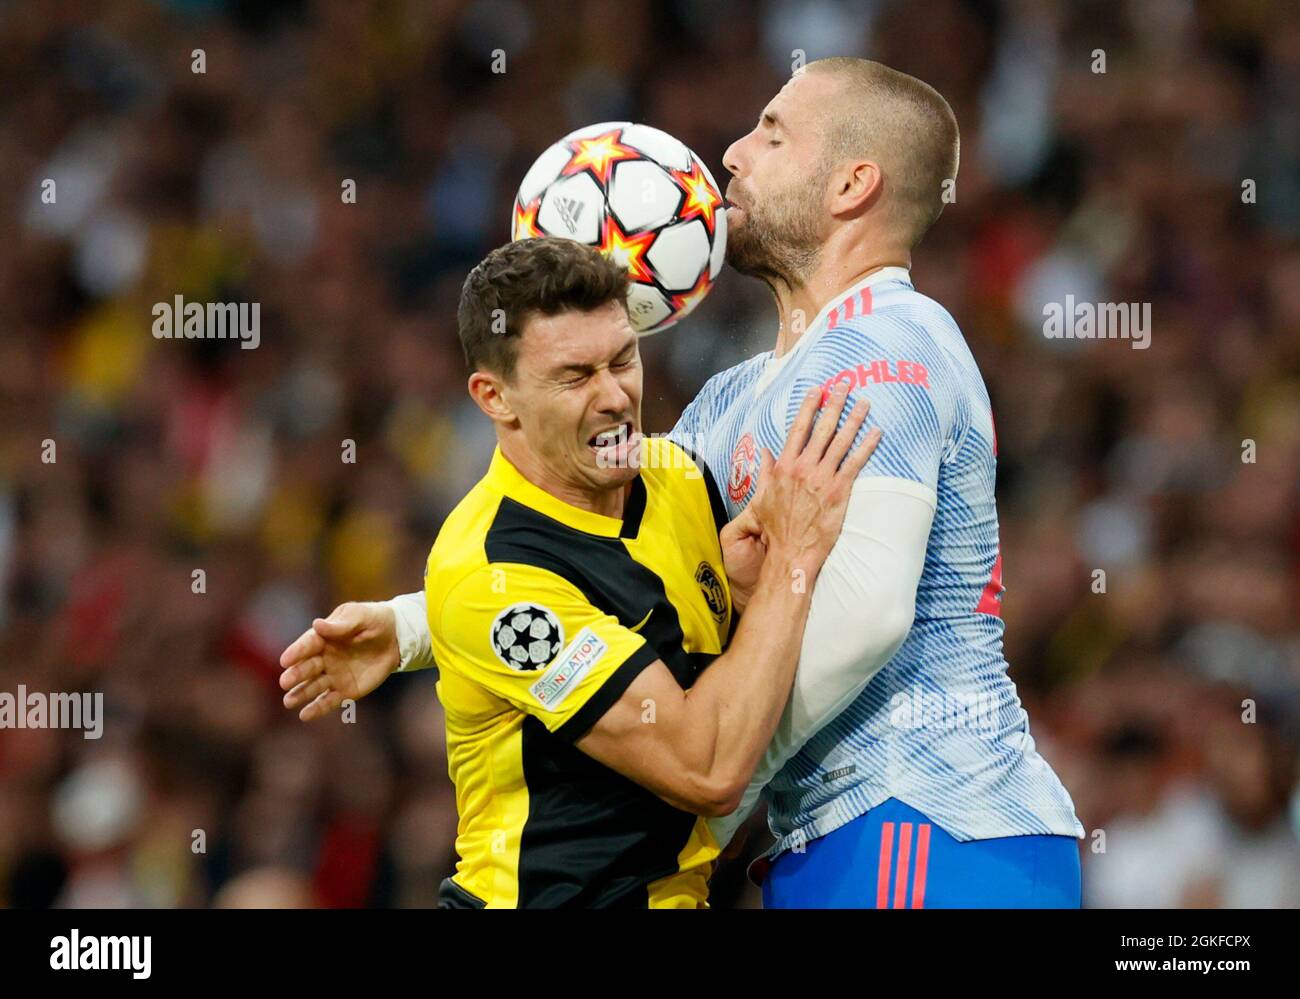 Soccer Football - Champions League - Group F - BSC Young Boys v Manchester United - Stadion Wankdorf, Bern, Switzerland- September 14, 2021 BSC Young Boys' Christian Fassnacht in action with Manchester United's Luke Shaw REUTERS/Denis Balibouse Stock Photo